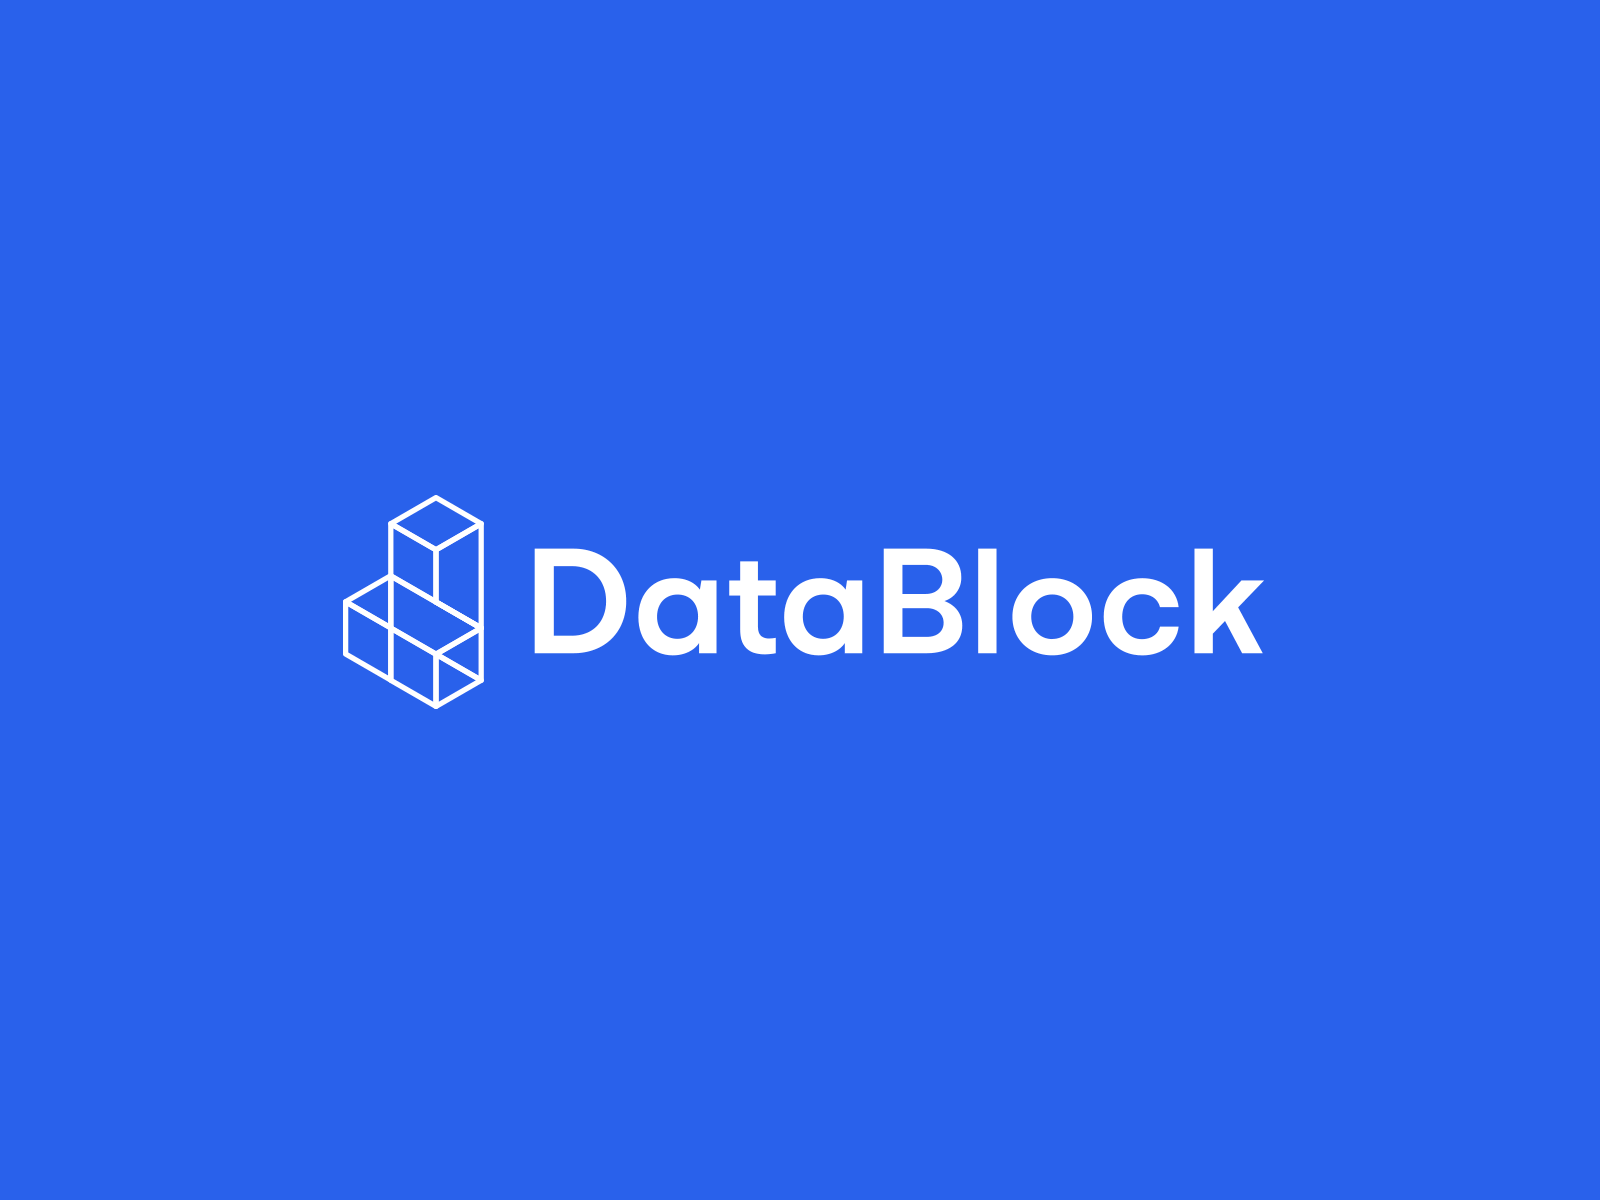 DataBlock Logo by Cody Robertson for Polyient Games on Dribbble